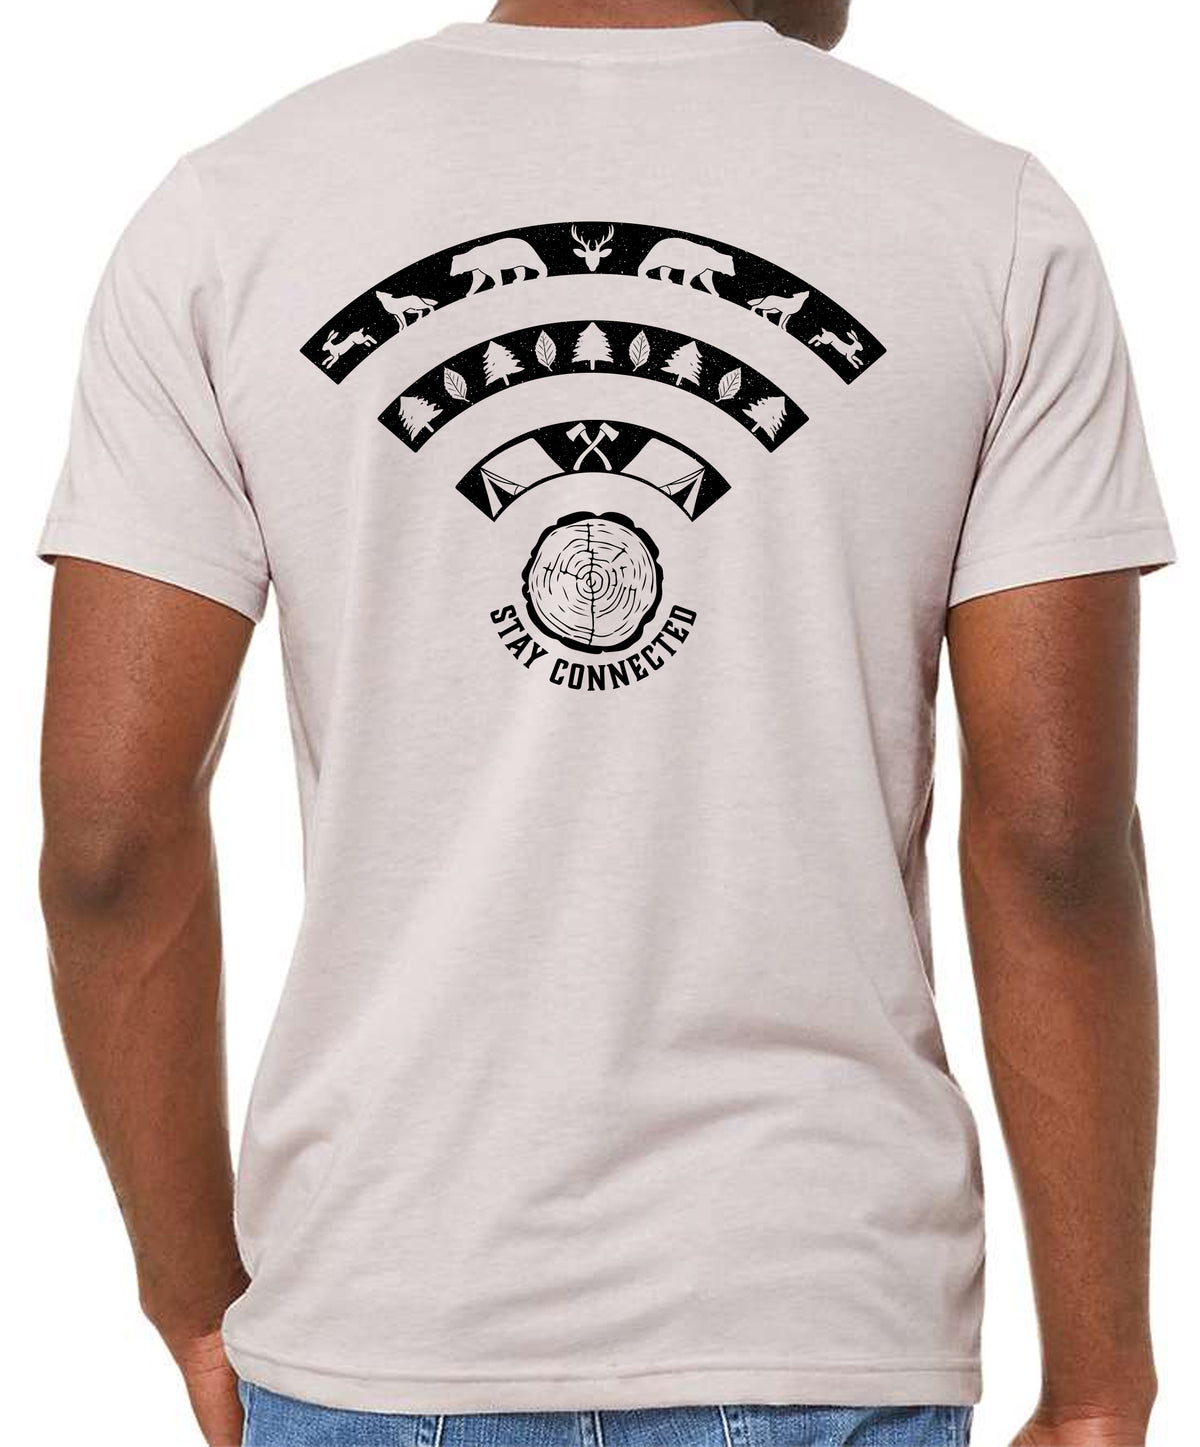 Stated Outfitters Stay Connected T-Shirt